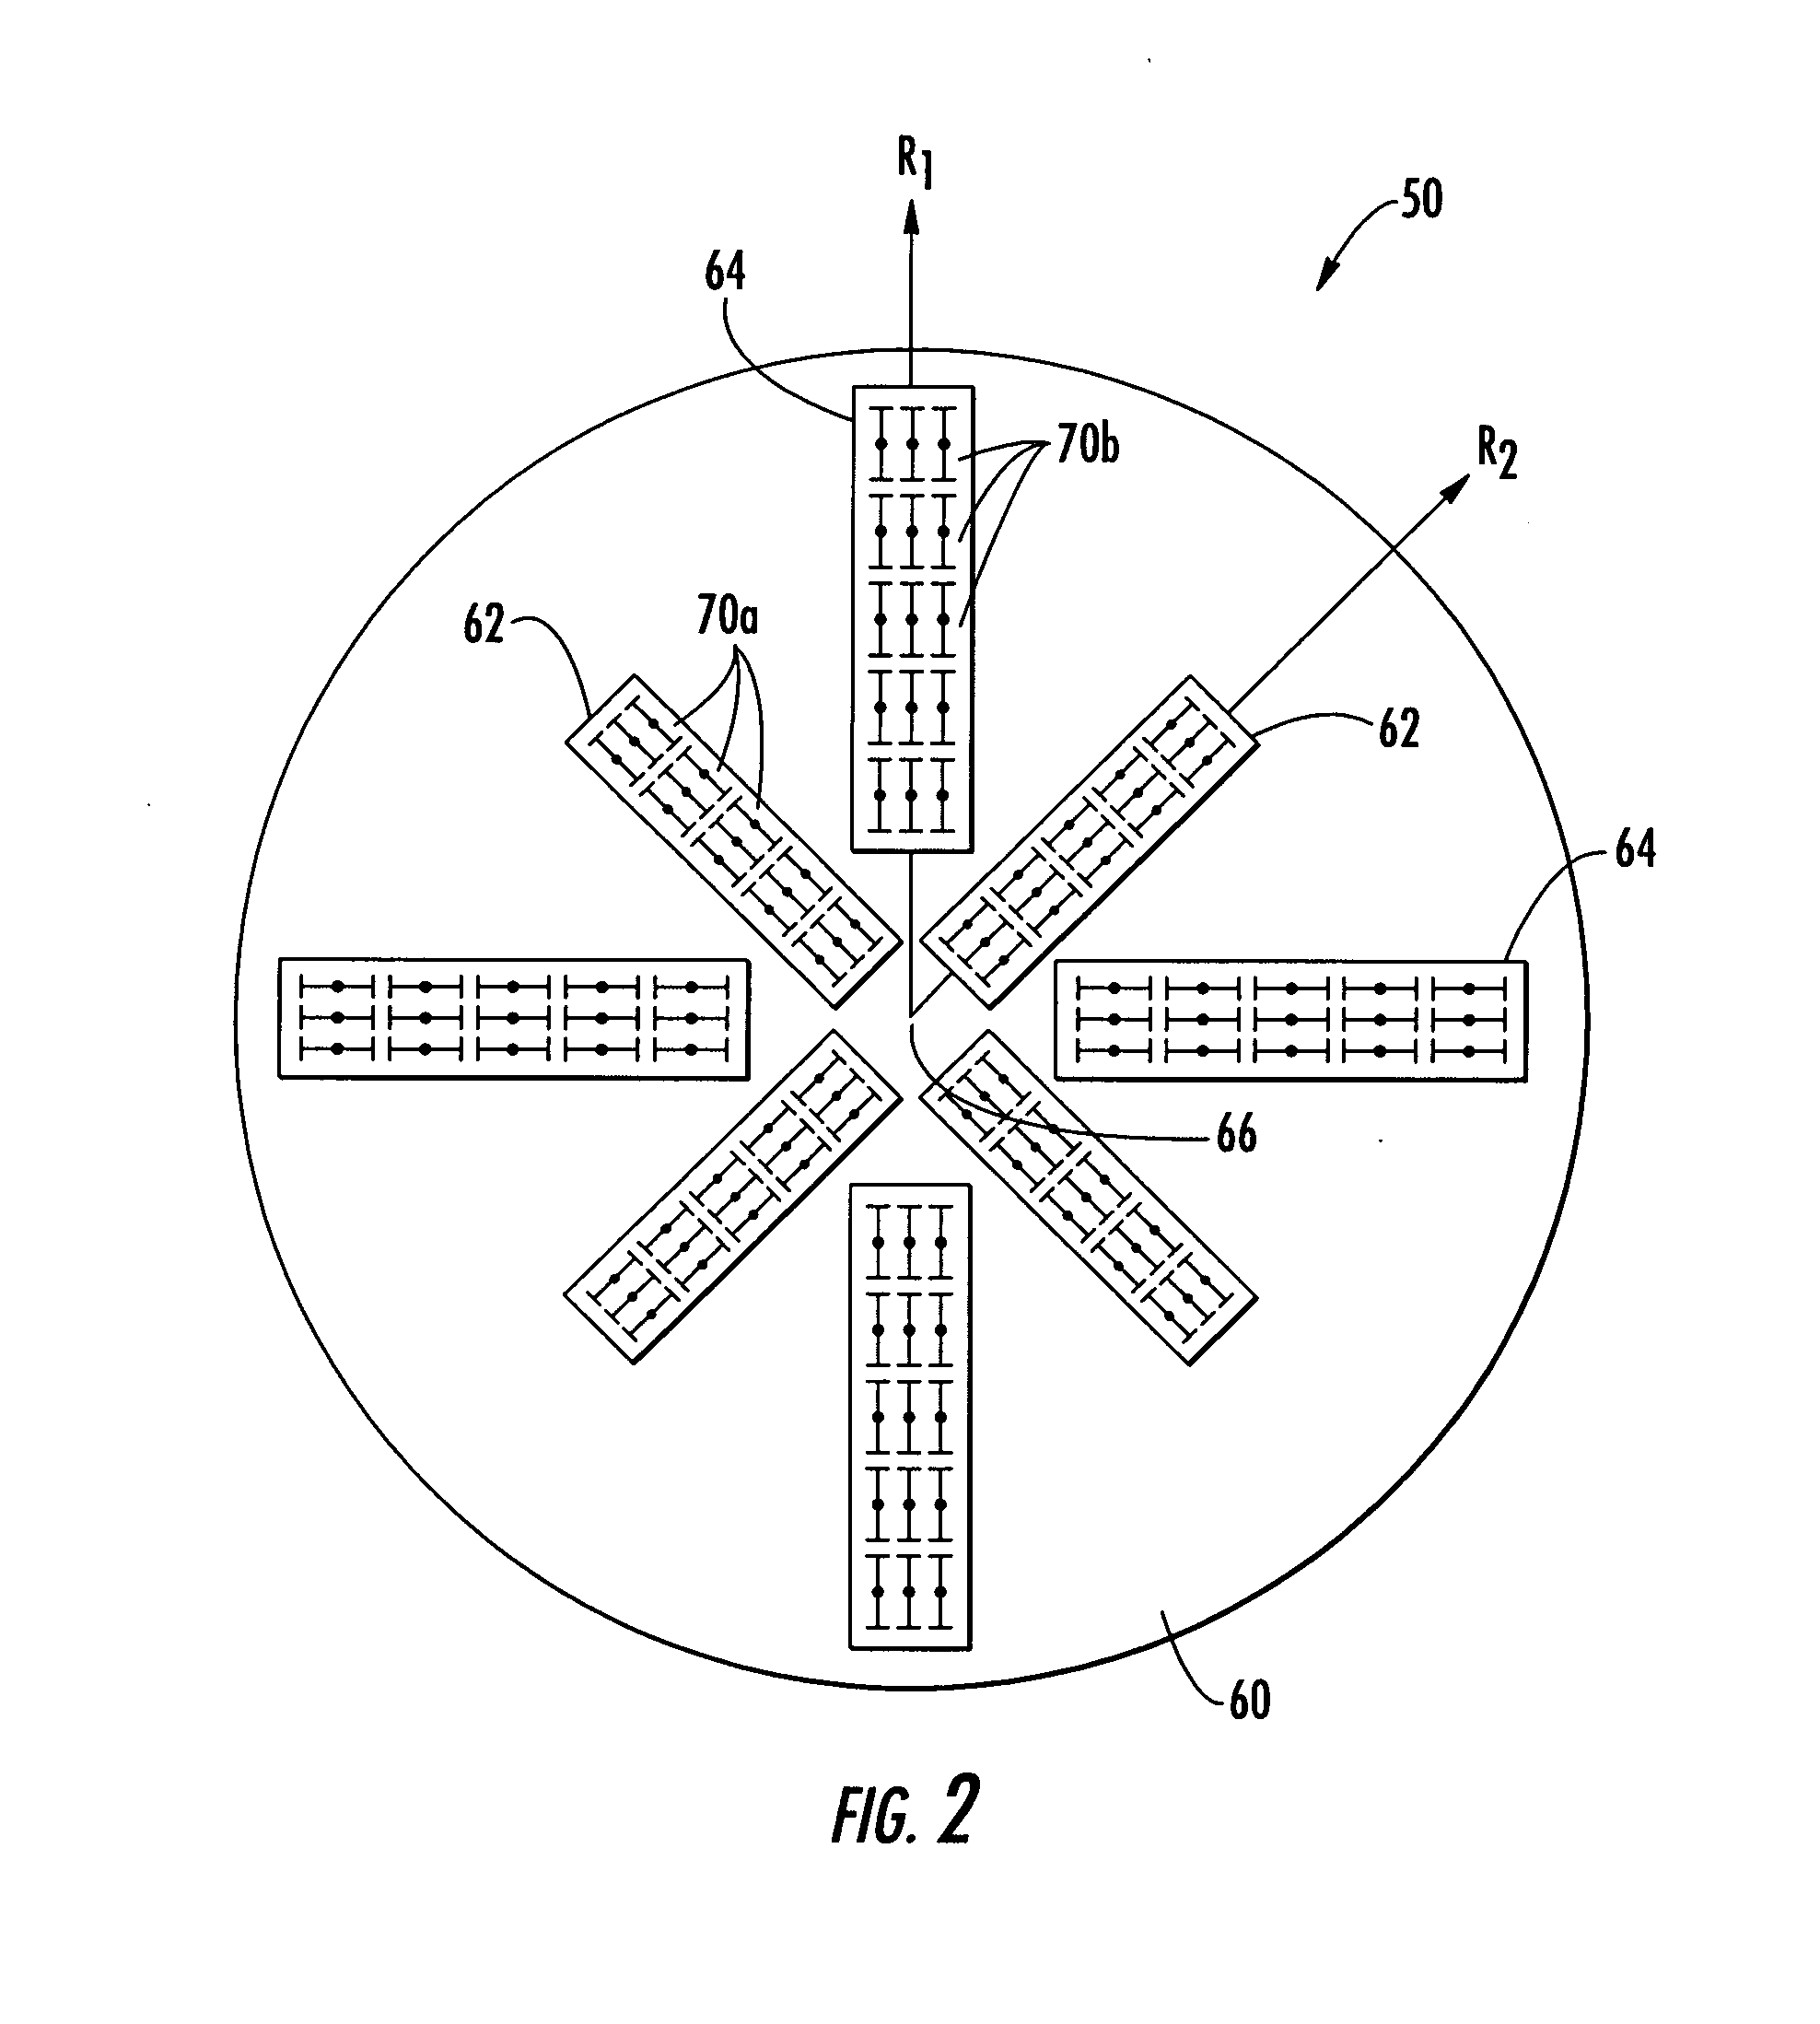 Multiband radially distributed phased array antenna with a sloping ground plane and associated methods